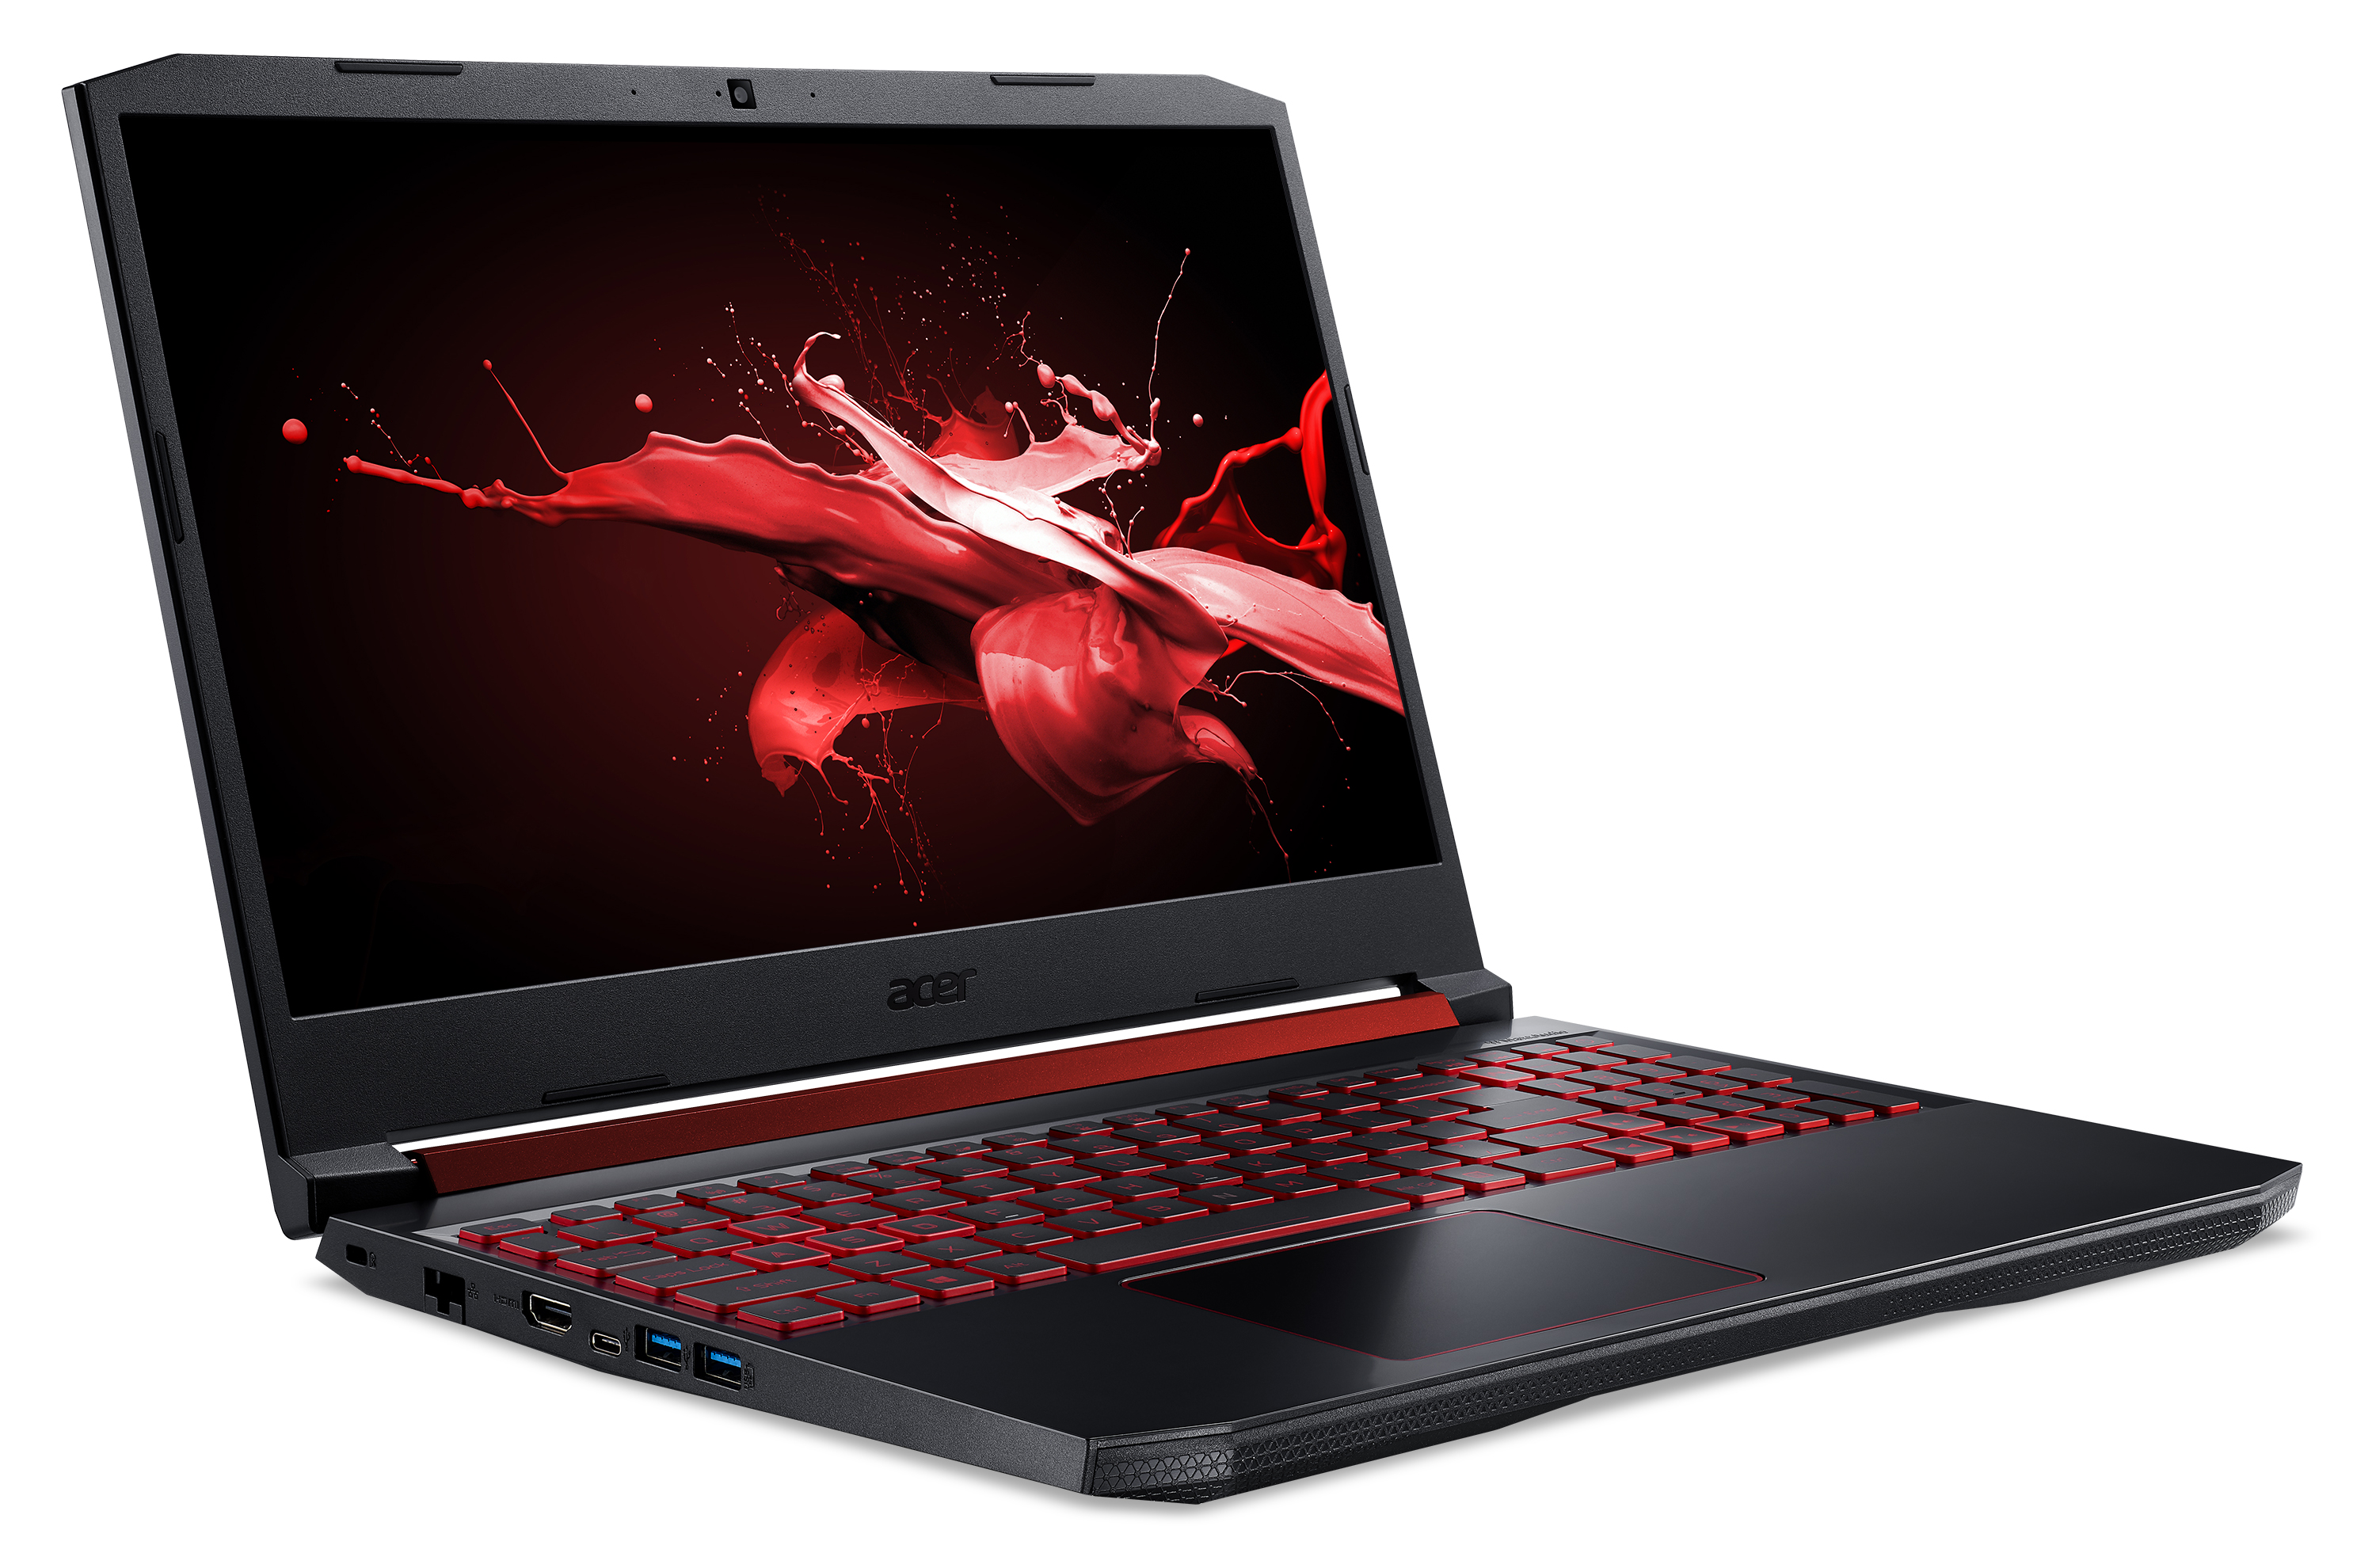 Photo of a Nitro 5 laptop, lit up with a red keyboard and red image on screen